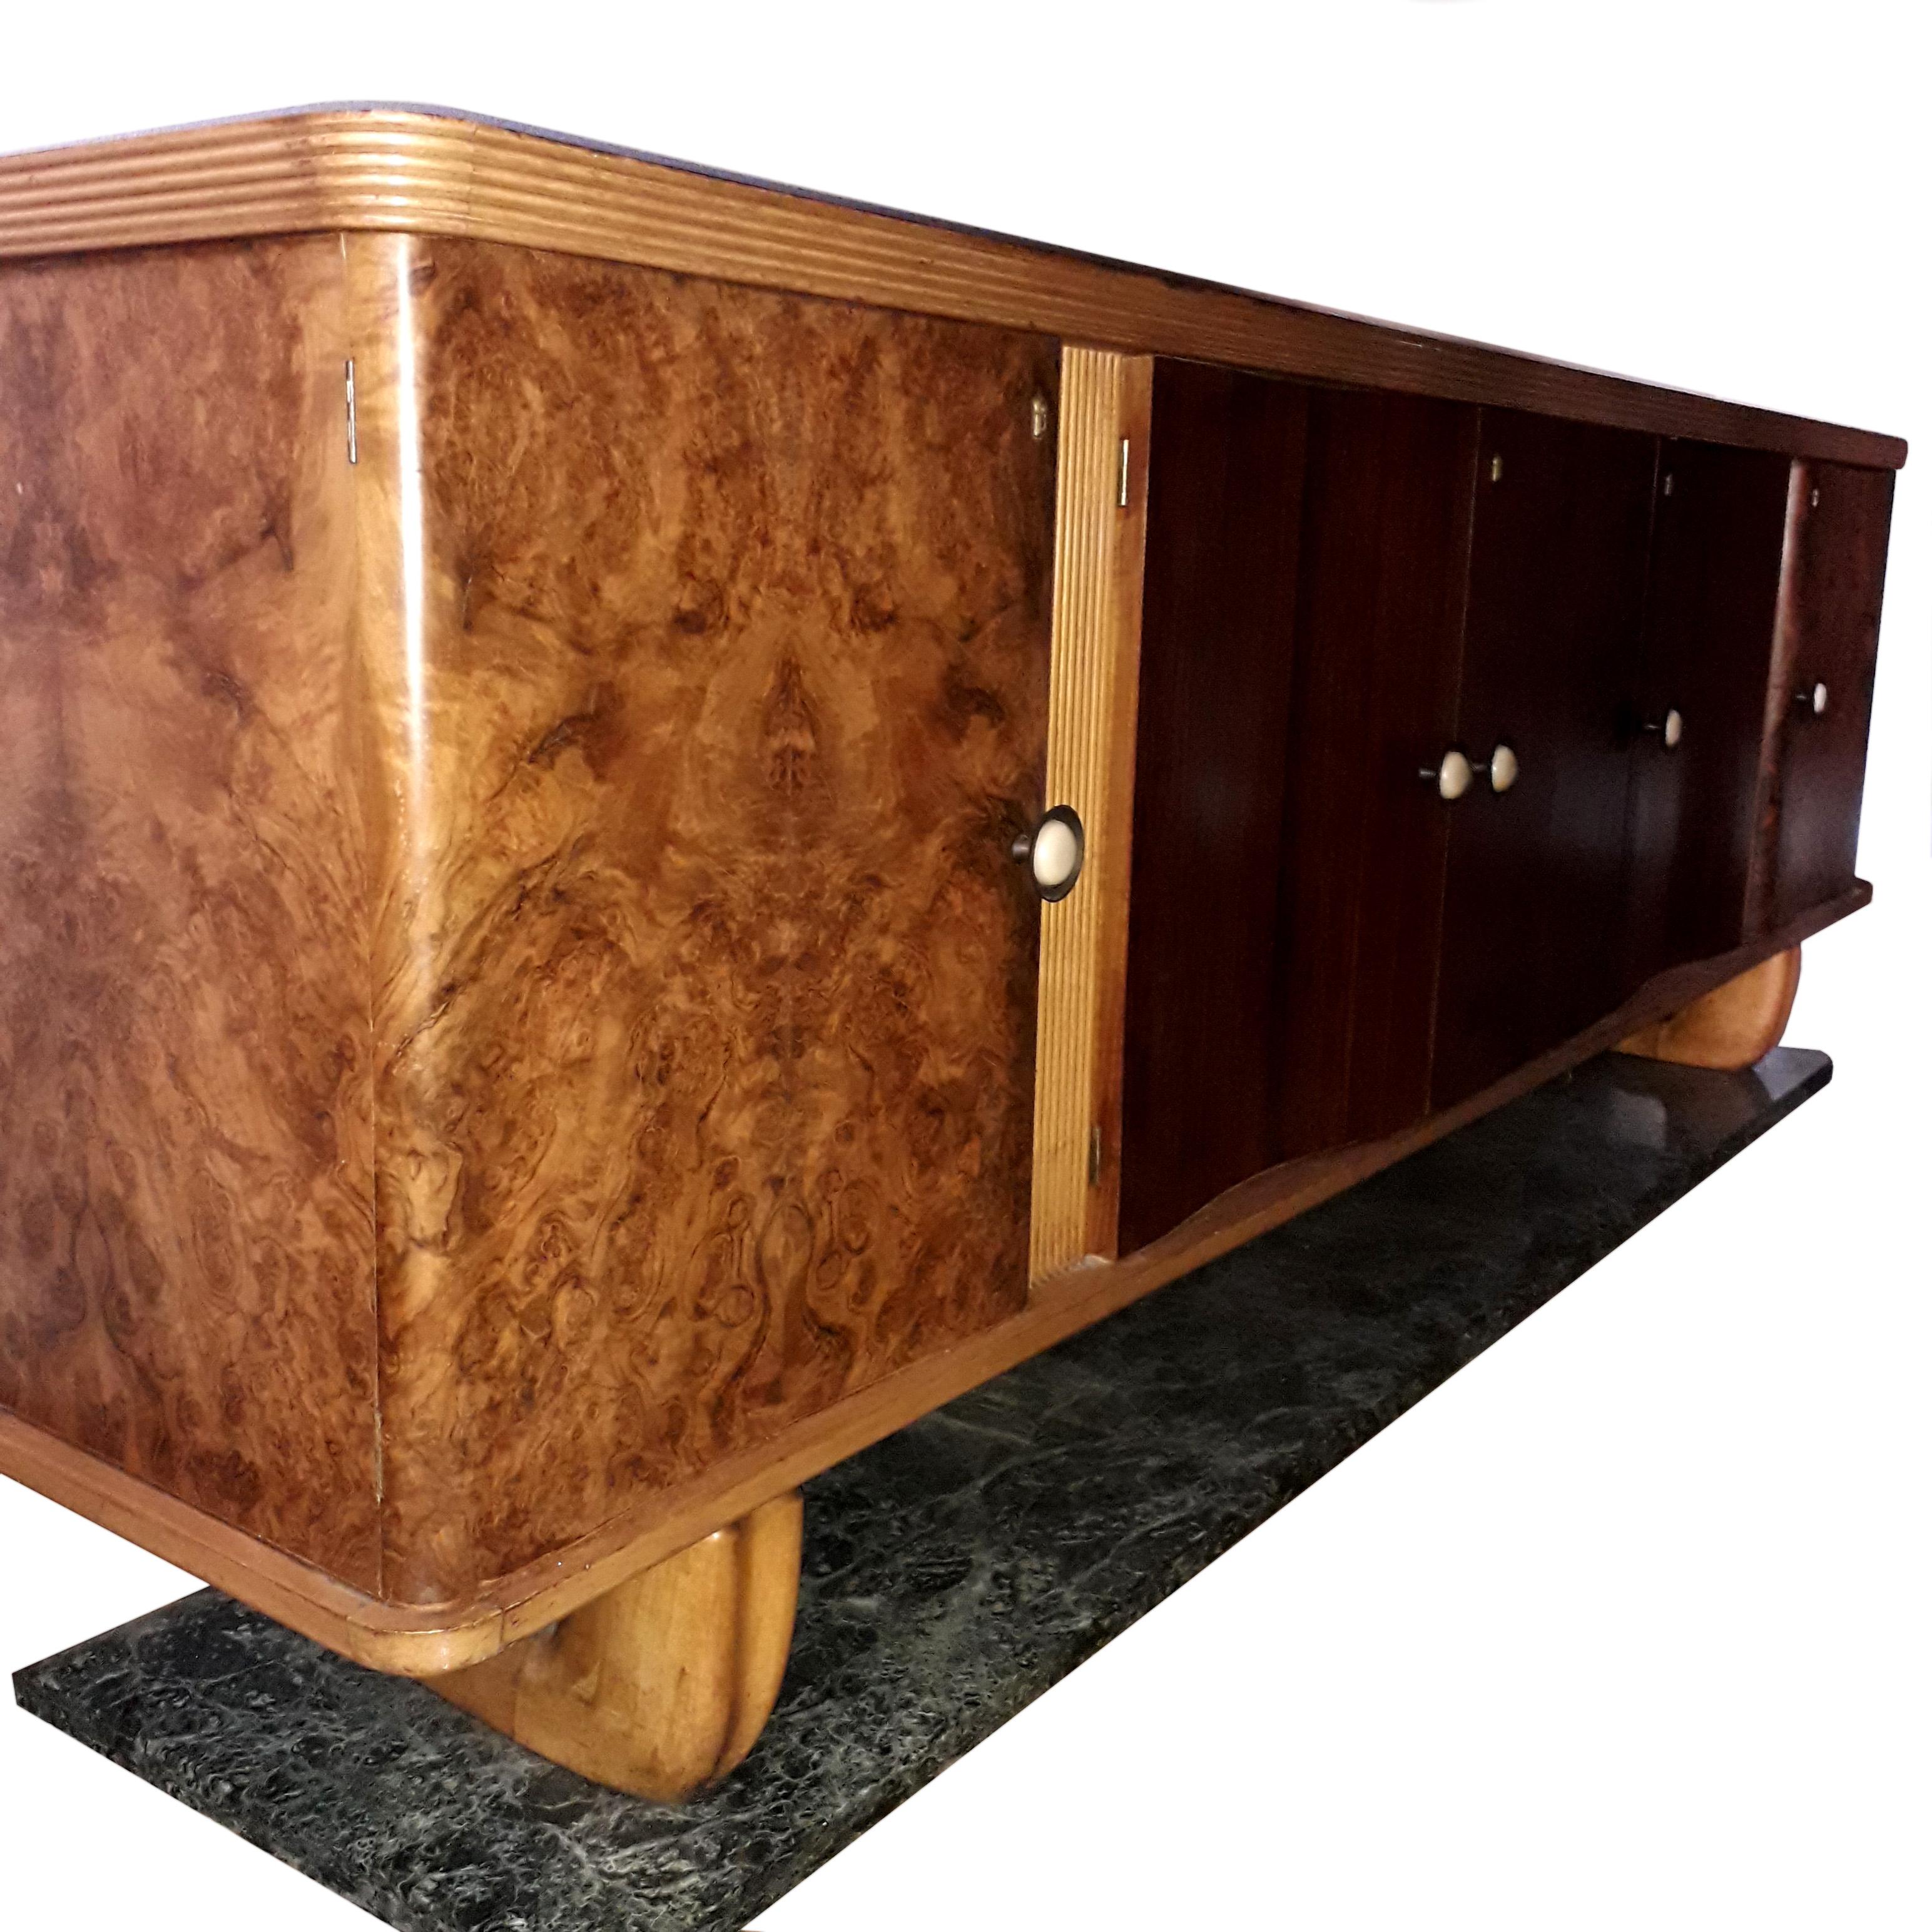 Art Deco sideboard designed by Vittorio Dassi, Milan.

The body with the curved facade, opens with five doors in rosewood veneer and burr walnut, discovering a maple sycamore interior. Connected by two feet in massive sycamore, the whole rests on